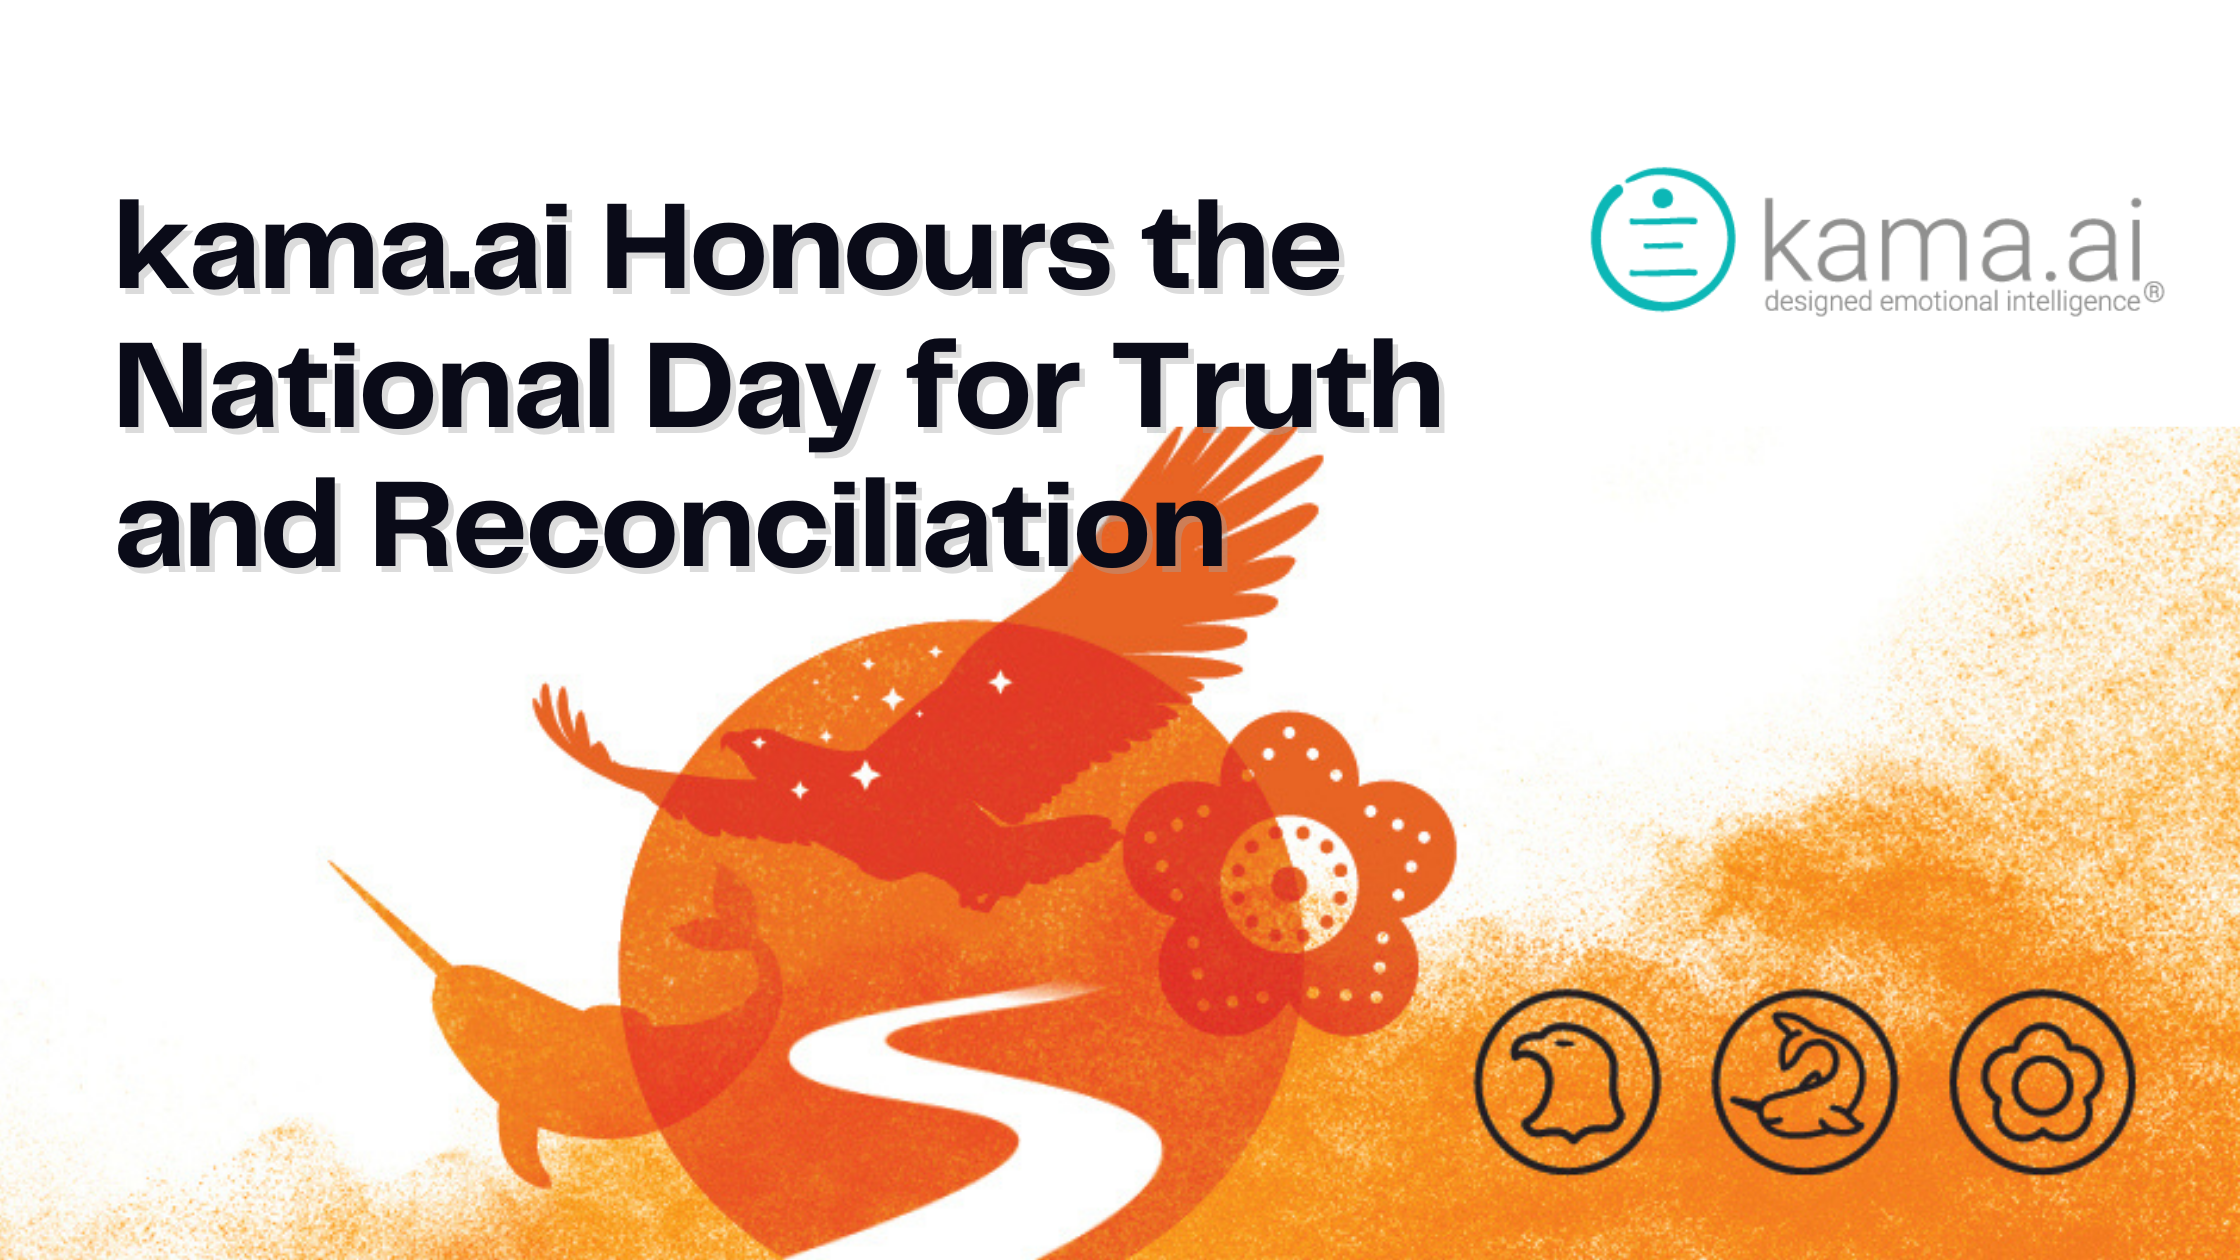 kama.ai Honours the National Day for Truth and Reconciliation